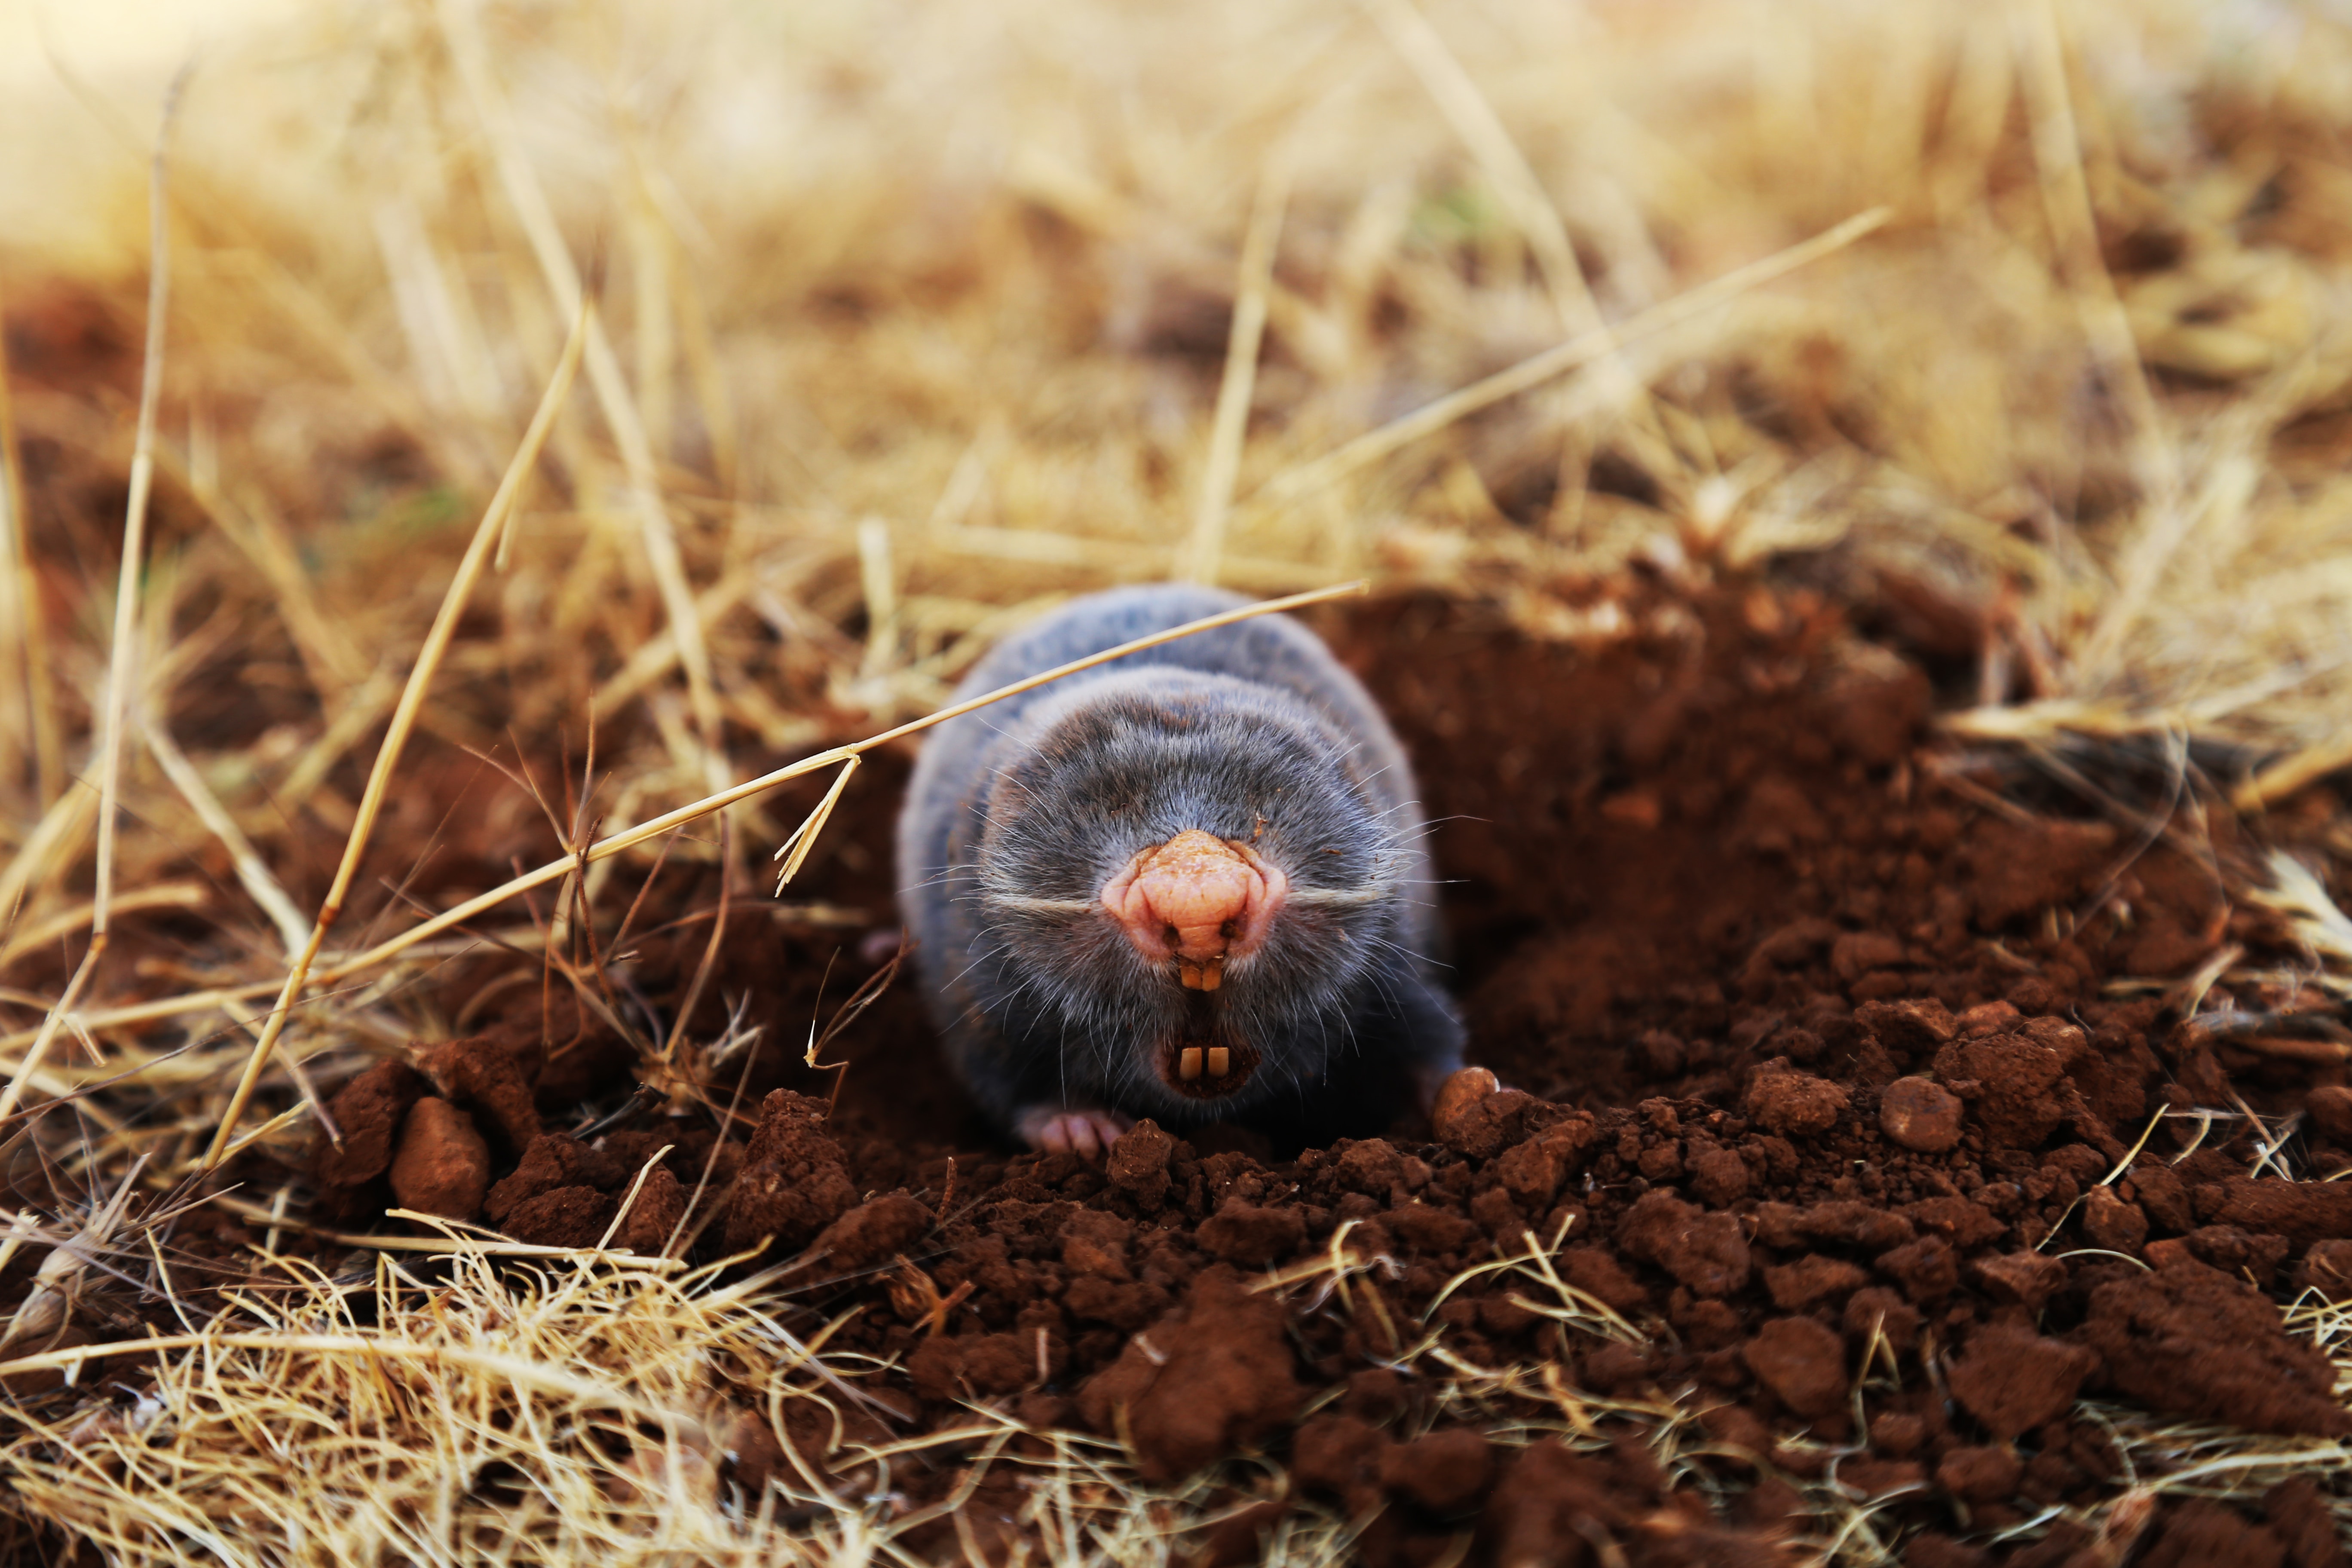 Mole Picture. Download Free Image